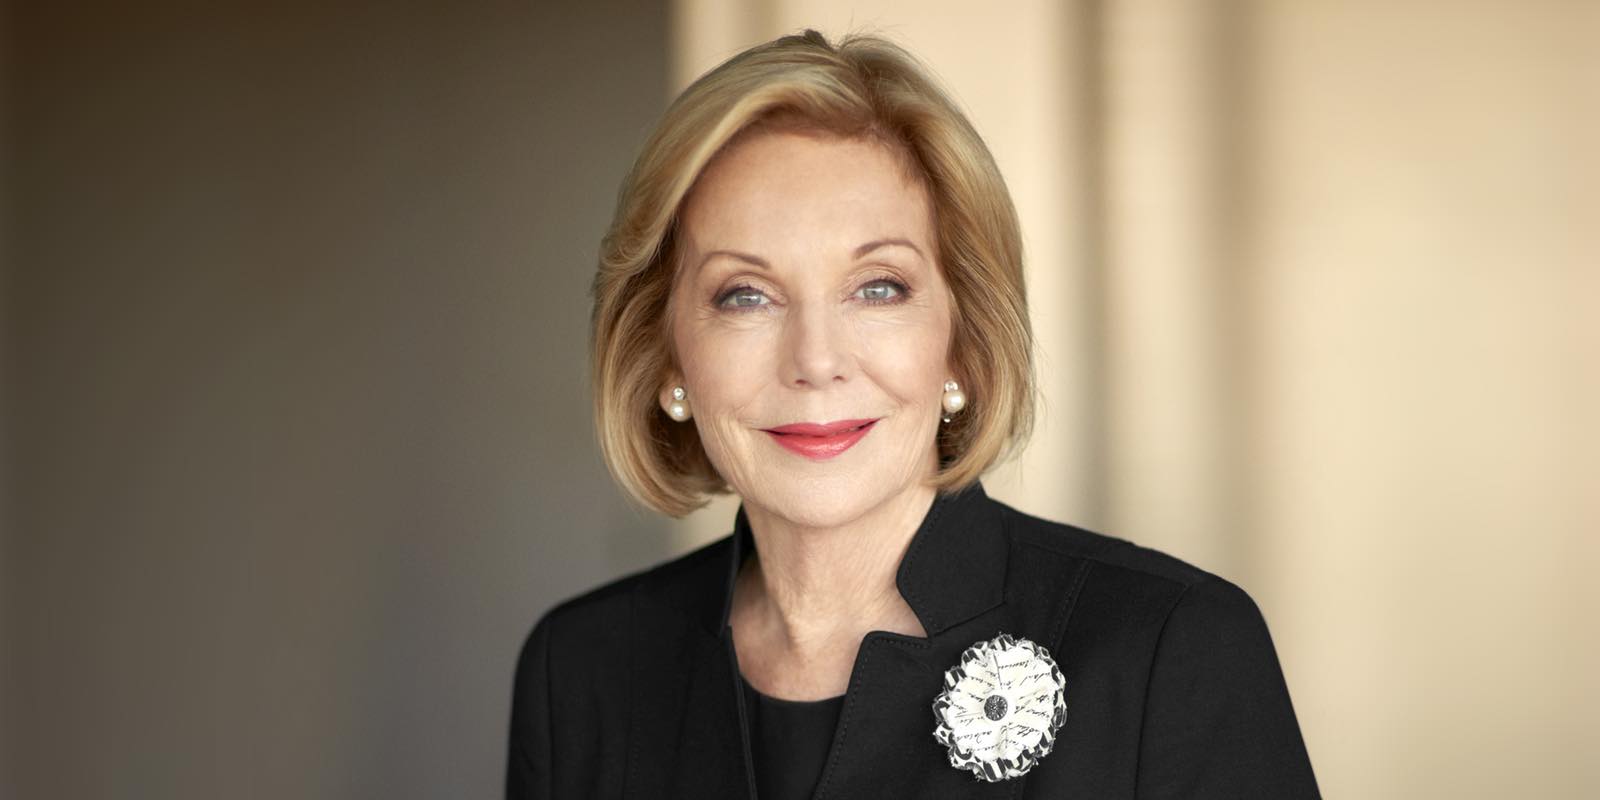 Ita Buttrose - Every Senior Needs A Plan To Help Them Age Successfully